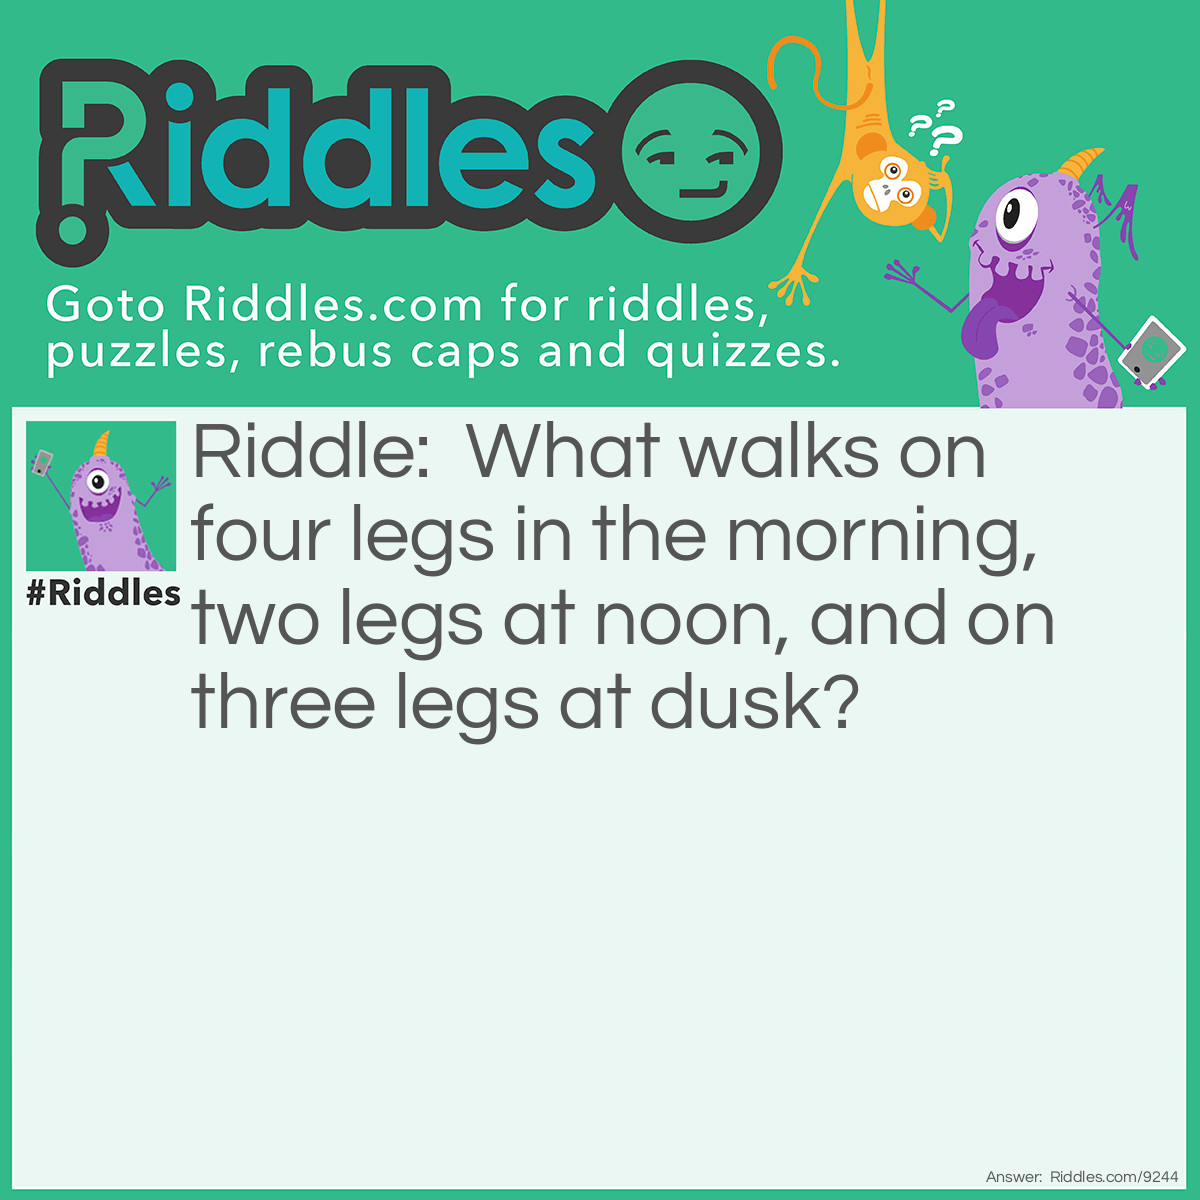 Riddle: What walks on four legs in the morning, two legs at noon, and on three legs at dusk? Answer: A human being because a human being crawls when he is a baby, walks upright when he is an adult, and uses a walking stick when he grows old and weak.